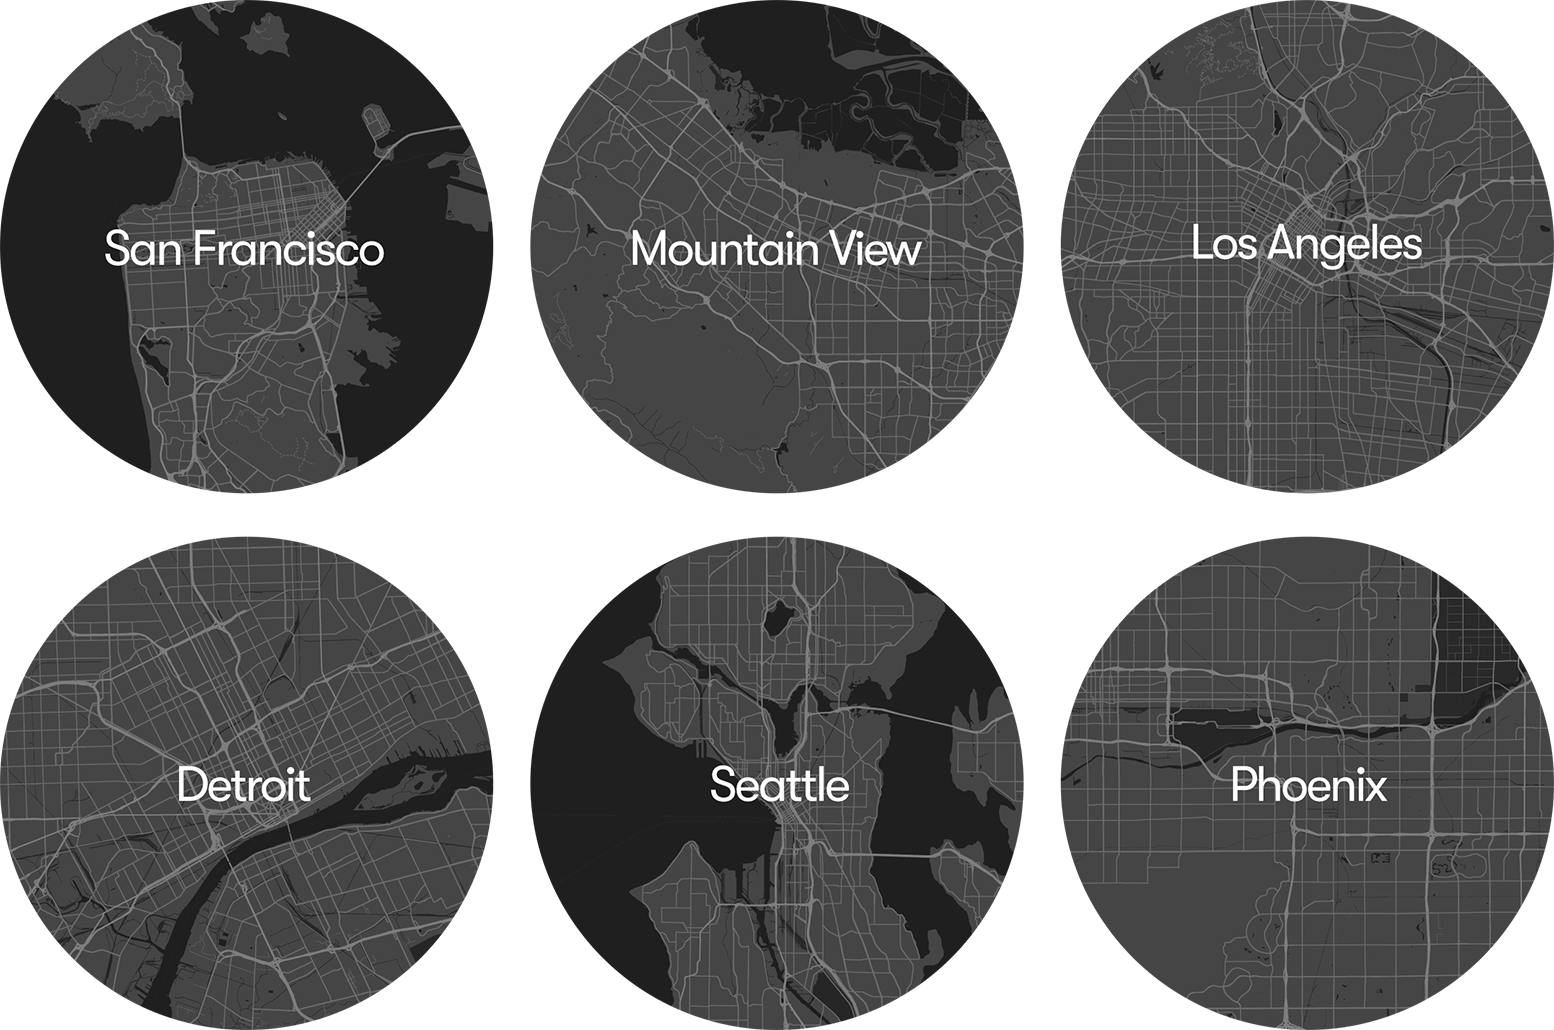 Waymo Open Dataset is collected from San Francisco, Mountain View, Los Angeles, Detroit, Seattle, and Phoenix.